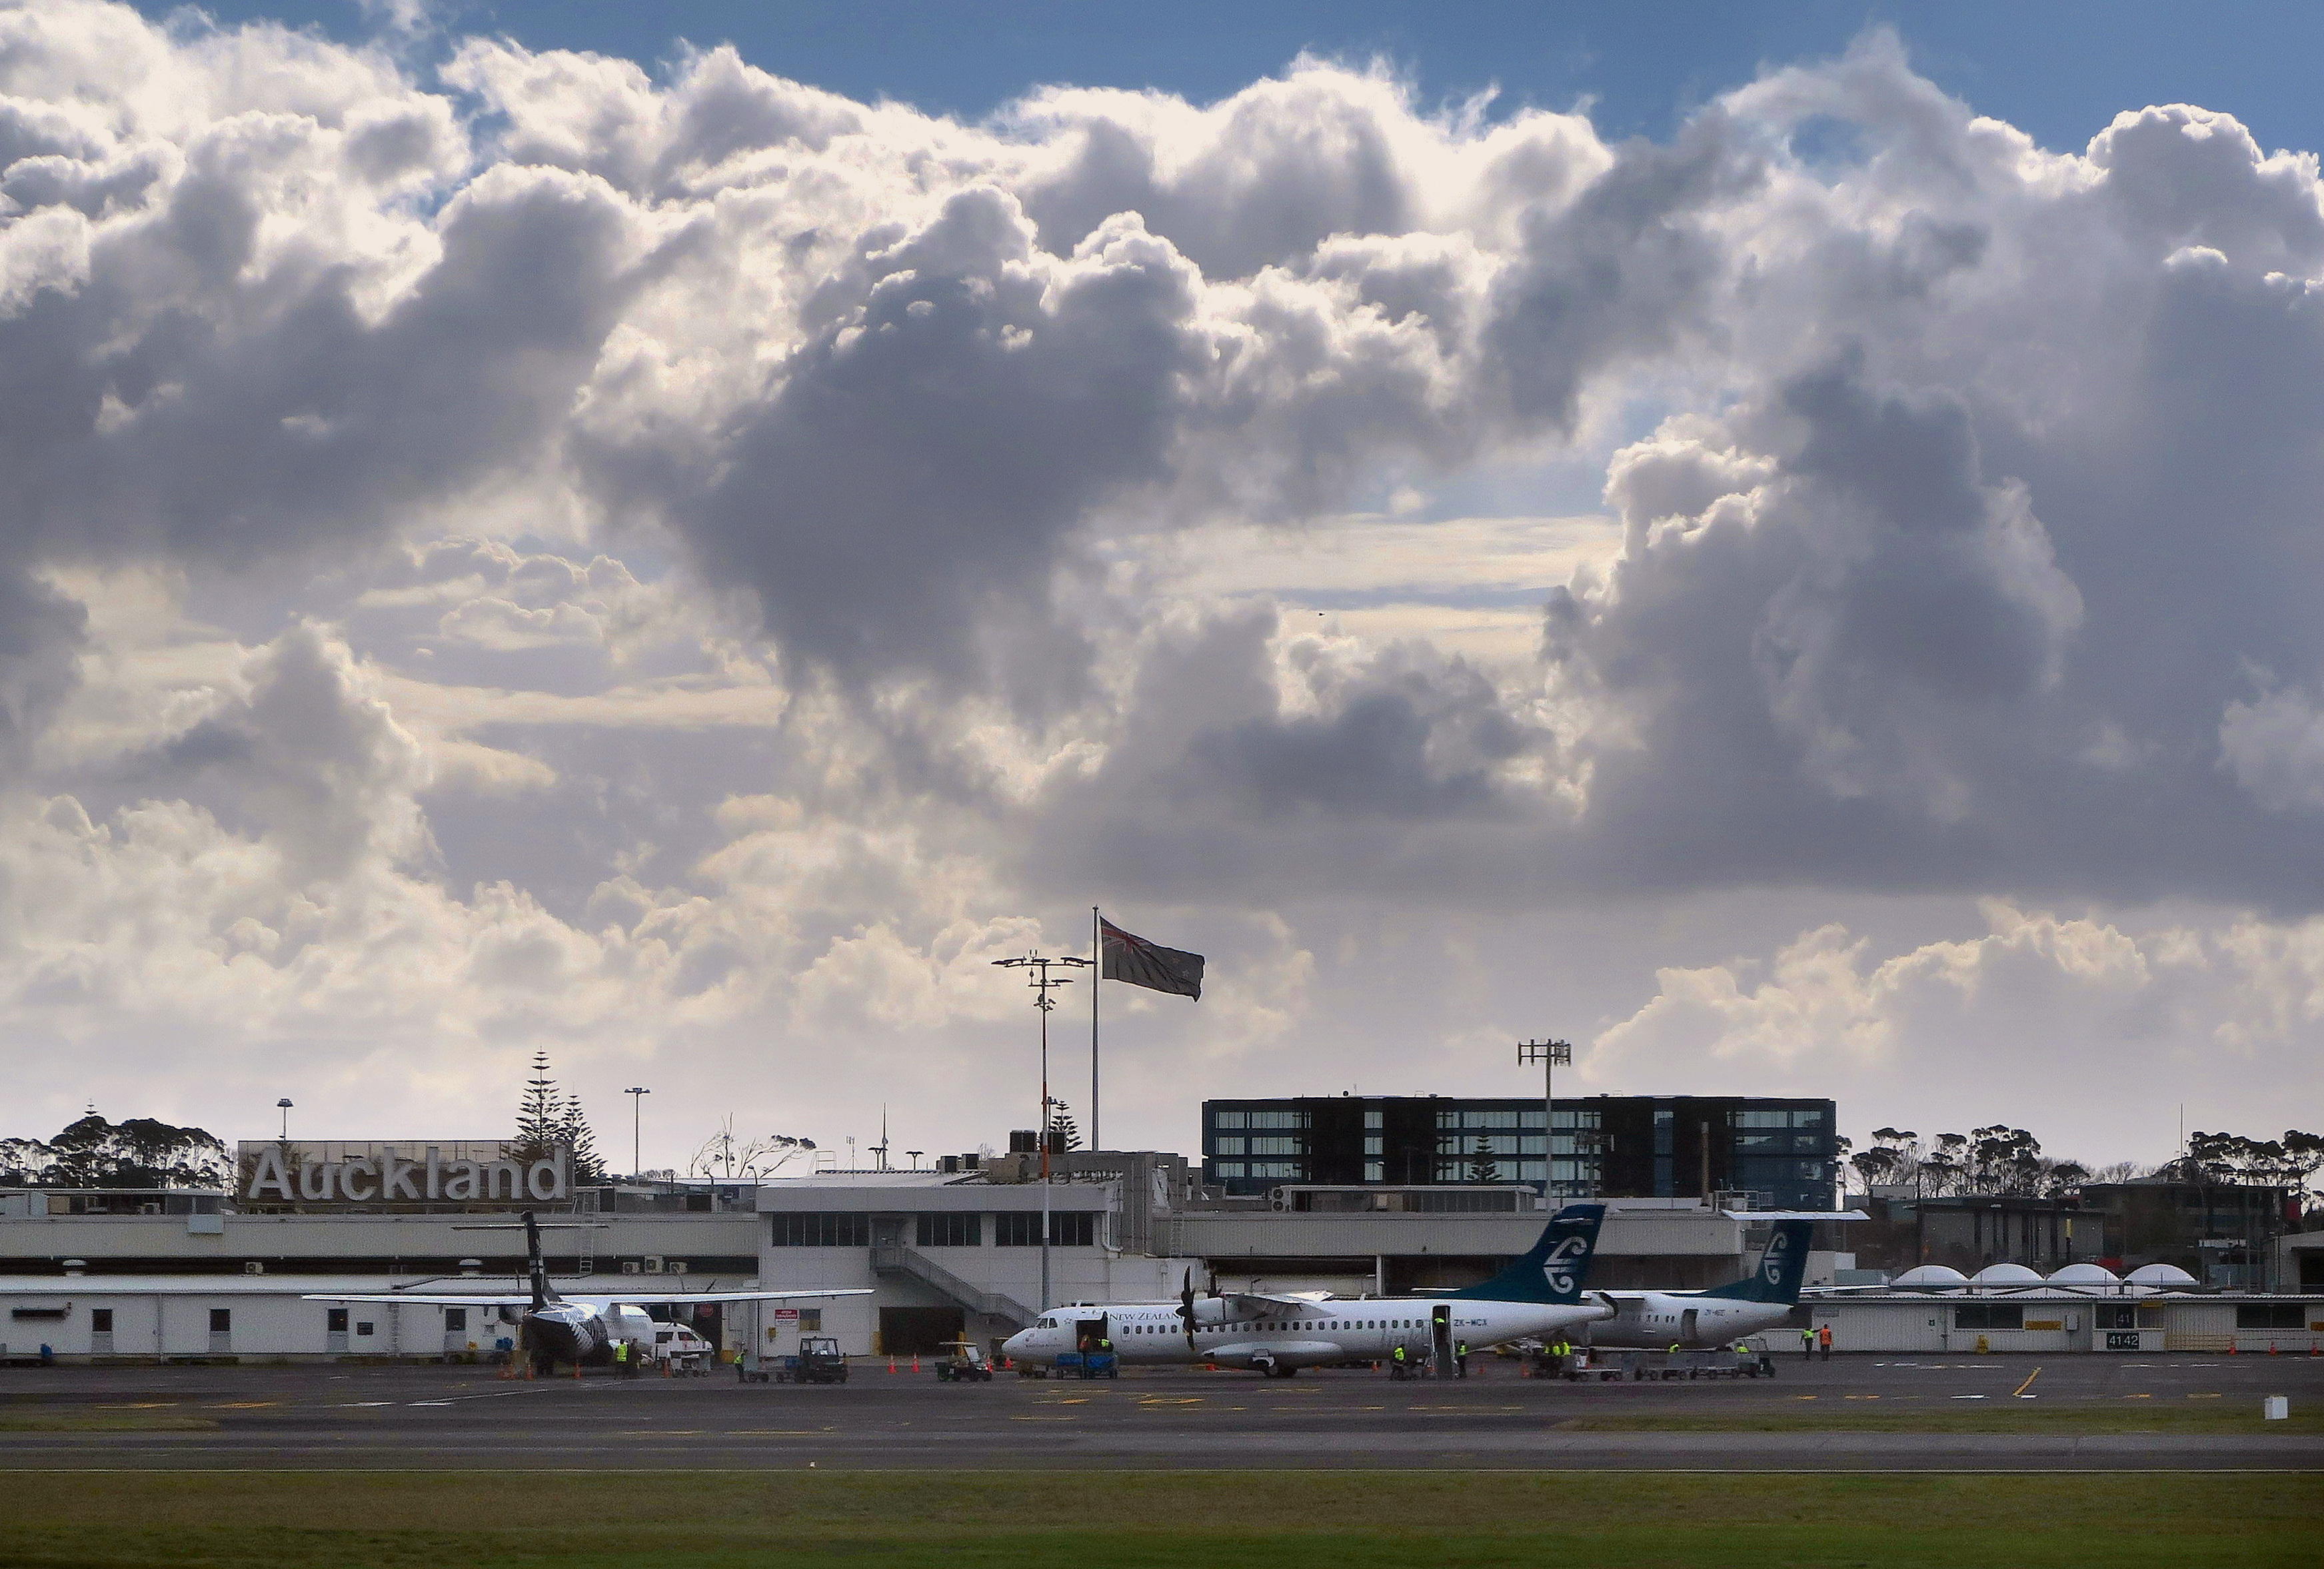 Air New Zealand Bombardier Q300 planes sit near the terminal at Auckland Airport in New Zealand